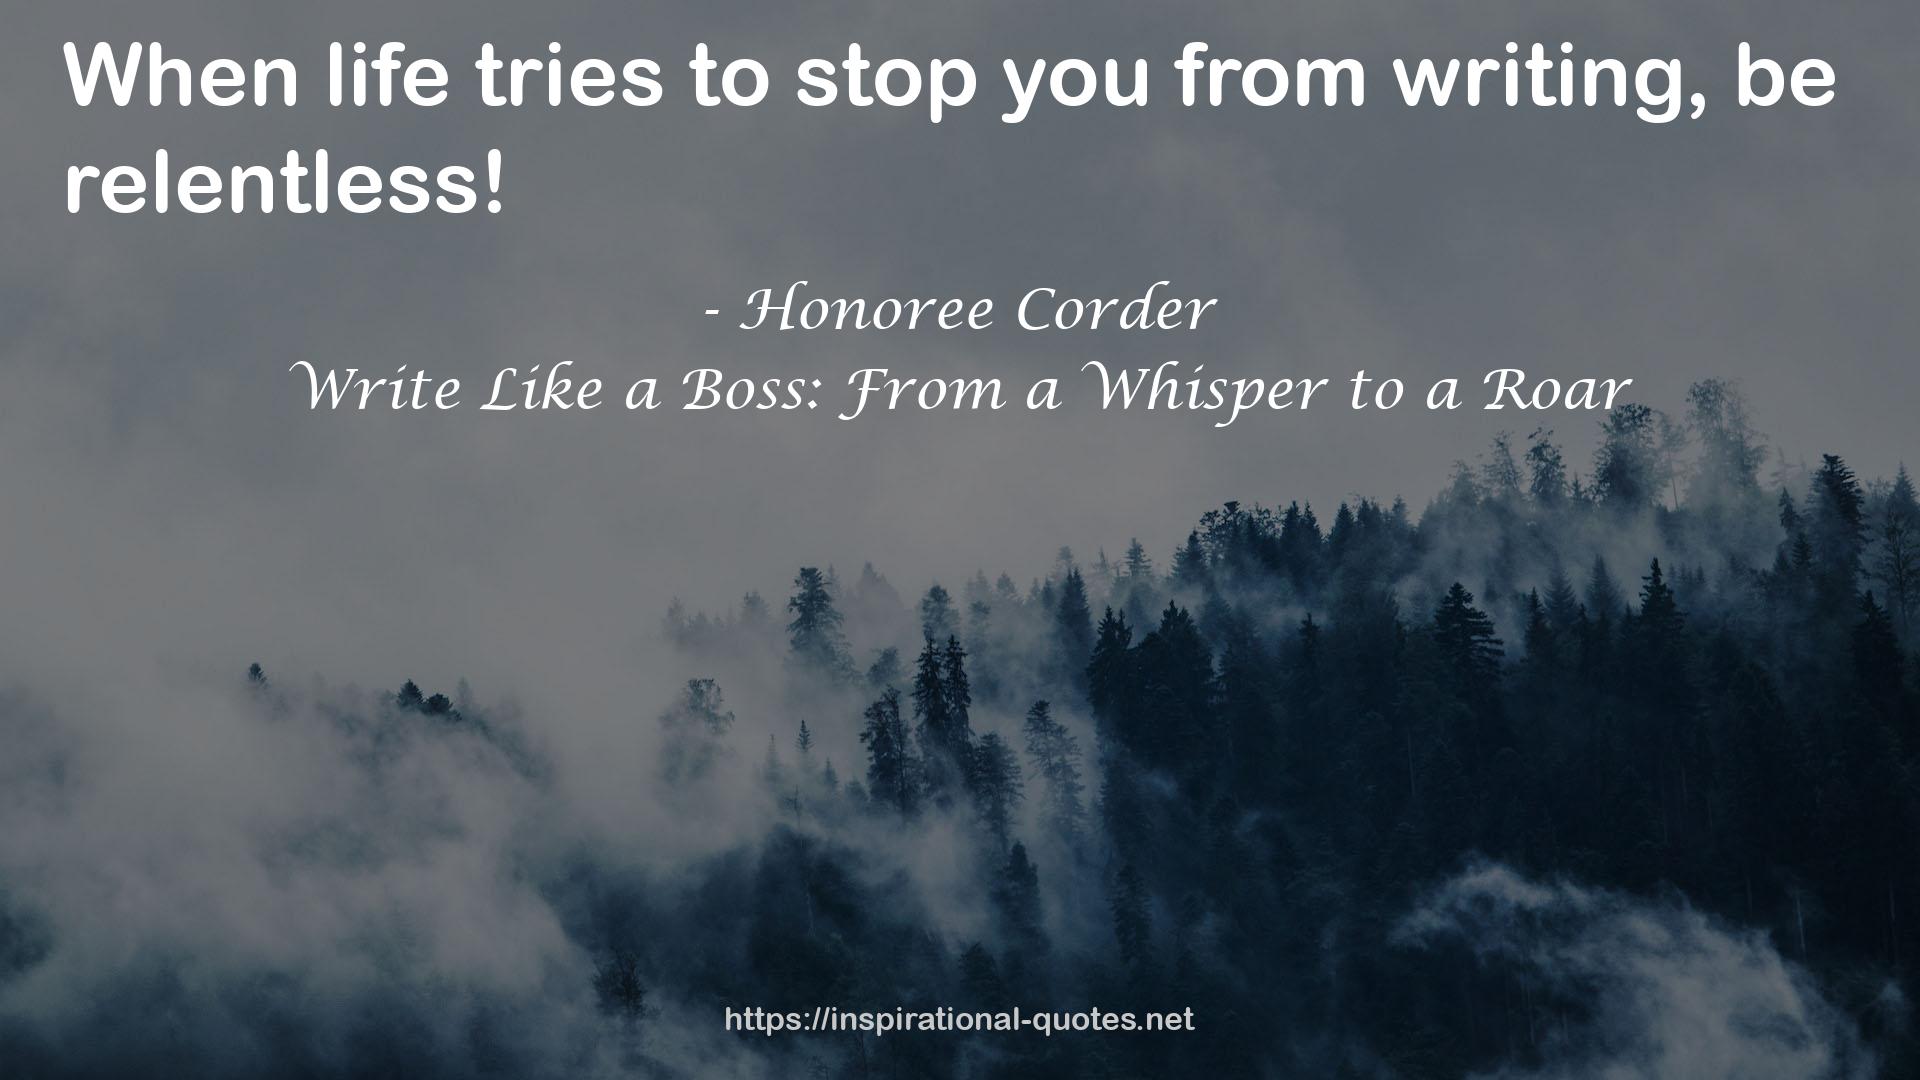 Write Like a Boss: From a Whisper to a Roar QUOTES